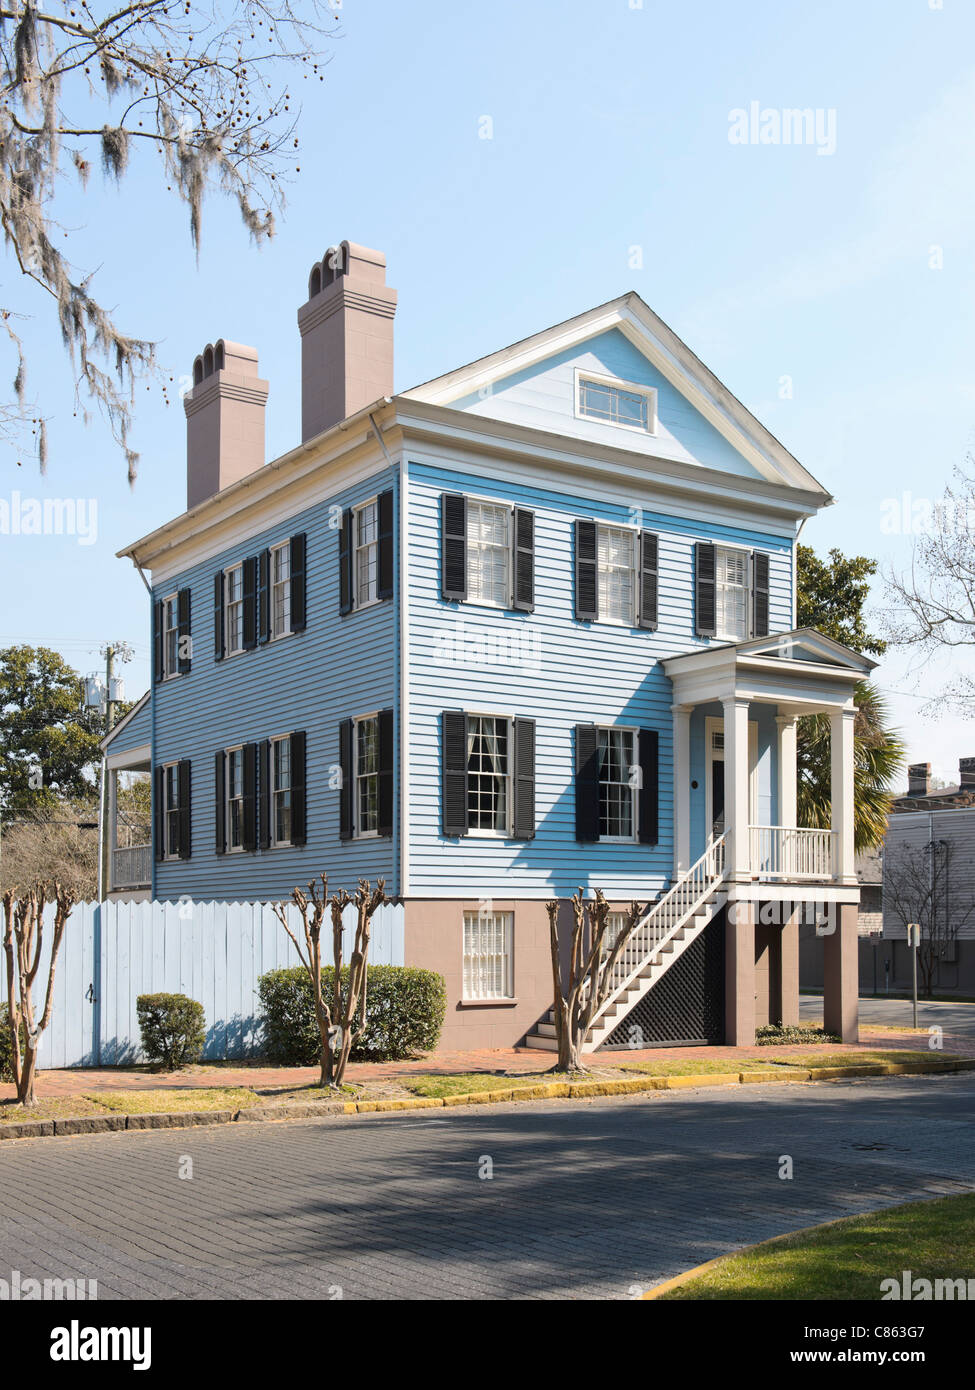 A house in historic District, Savannah Stock Photo